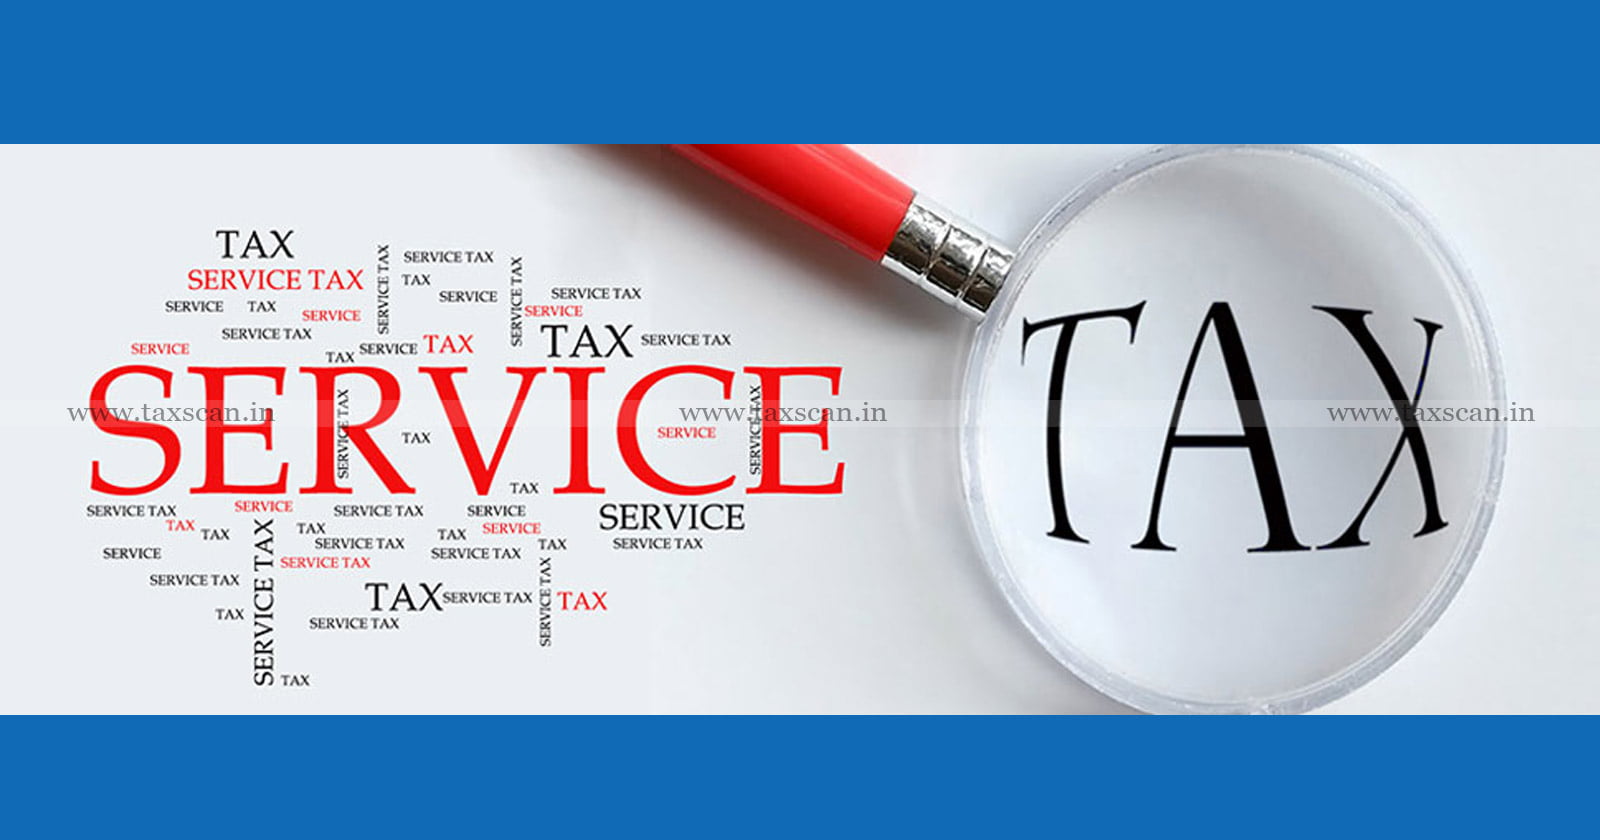 Registration - NBFC - NBFC Registration - Service tax for levy - Service tax - CESTAT - Customs - Excise - Service Tax - taxscan